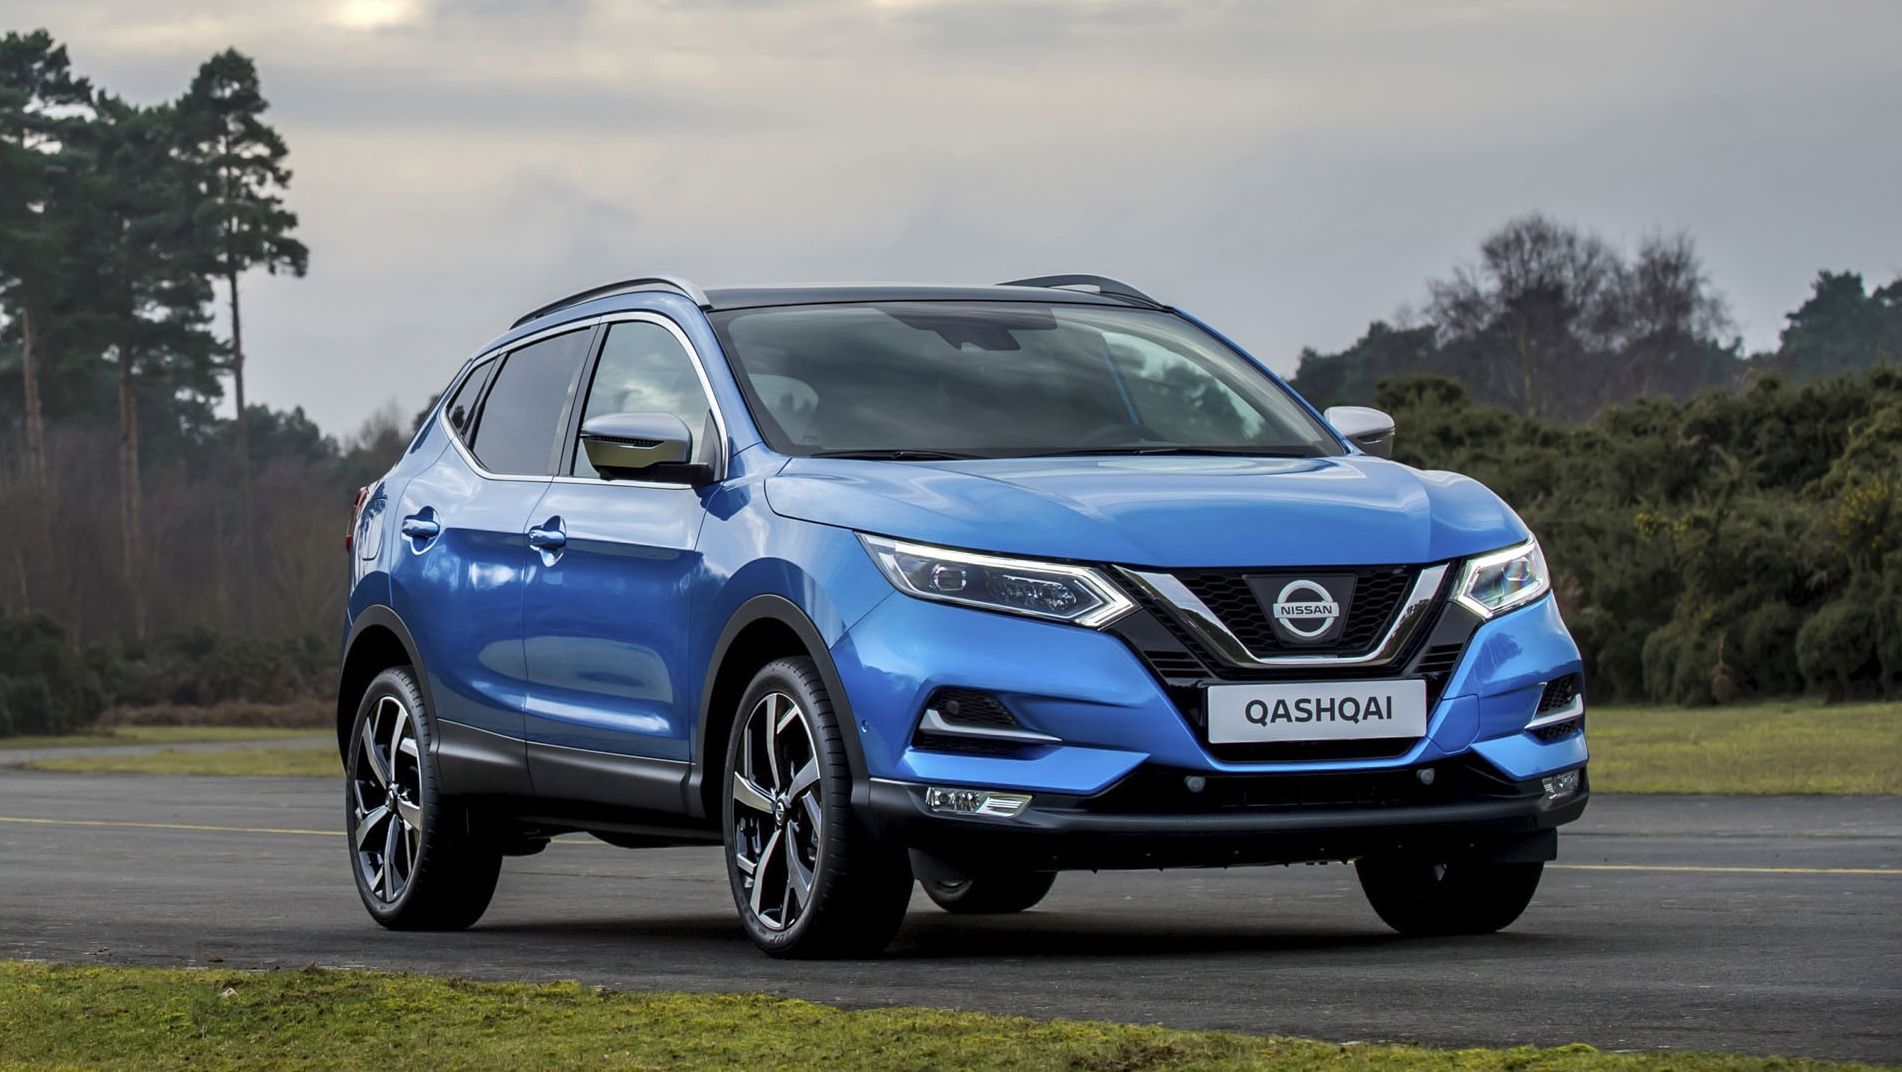 Nissan Qashqai Offers Technology And Performance Improvements